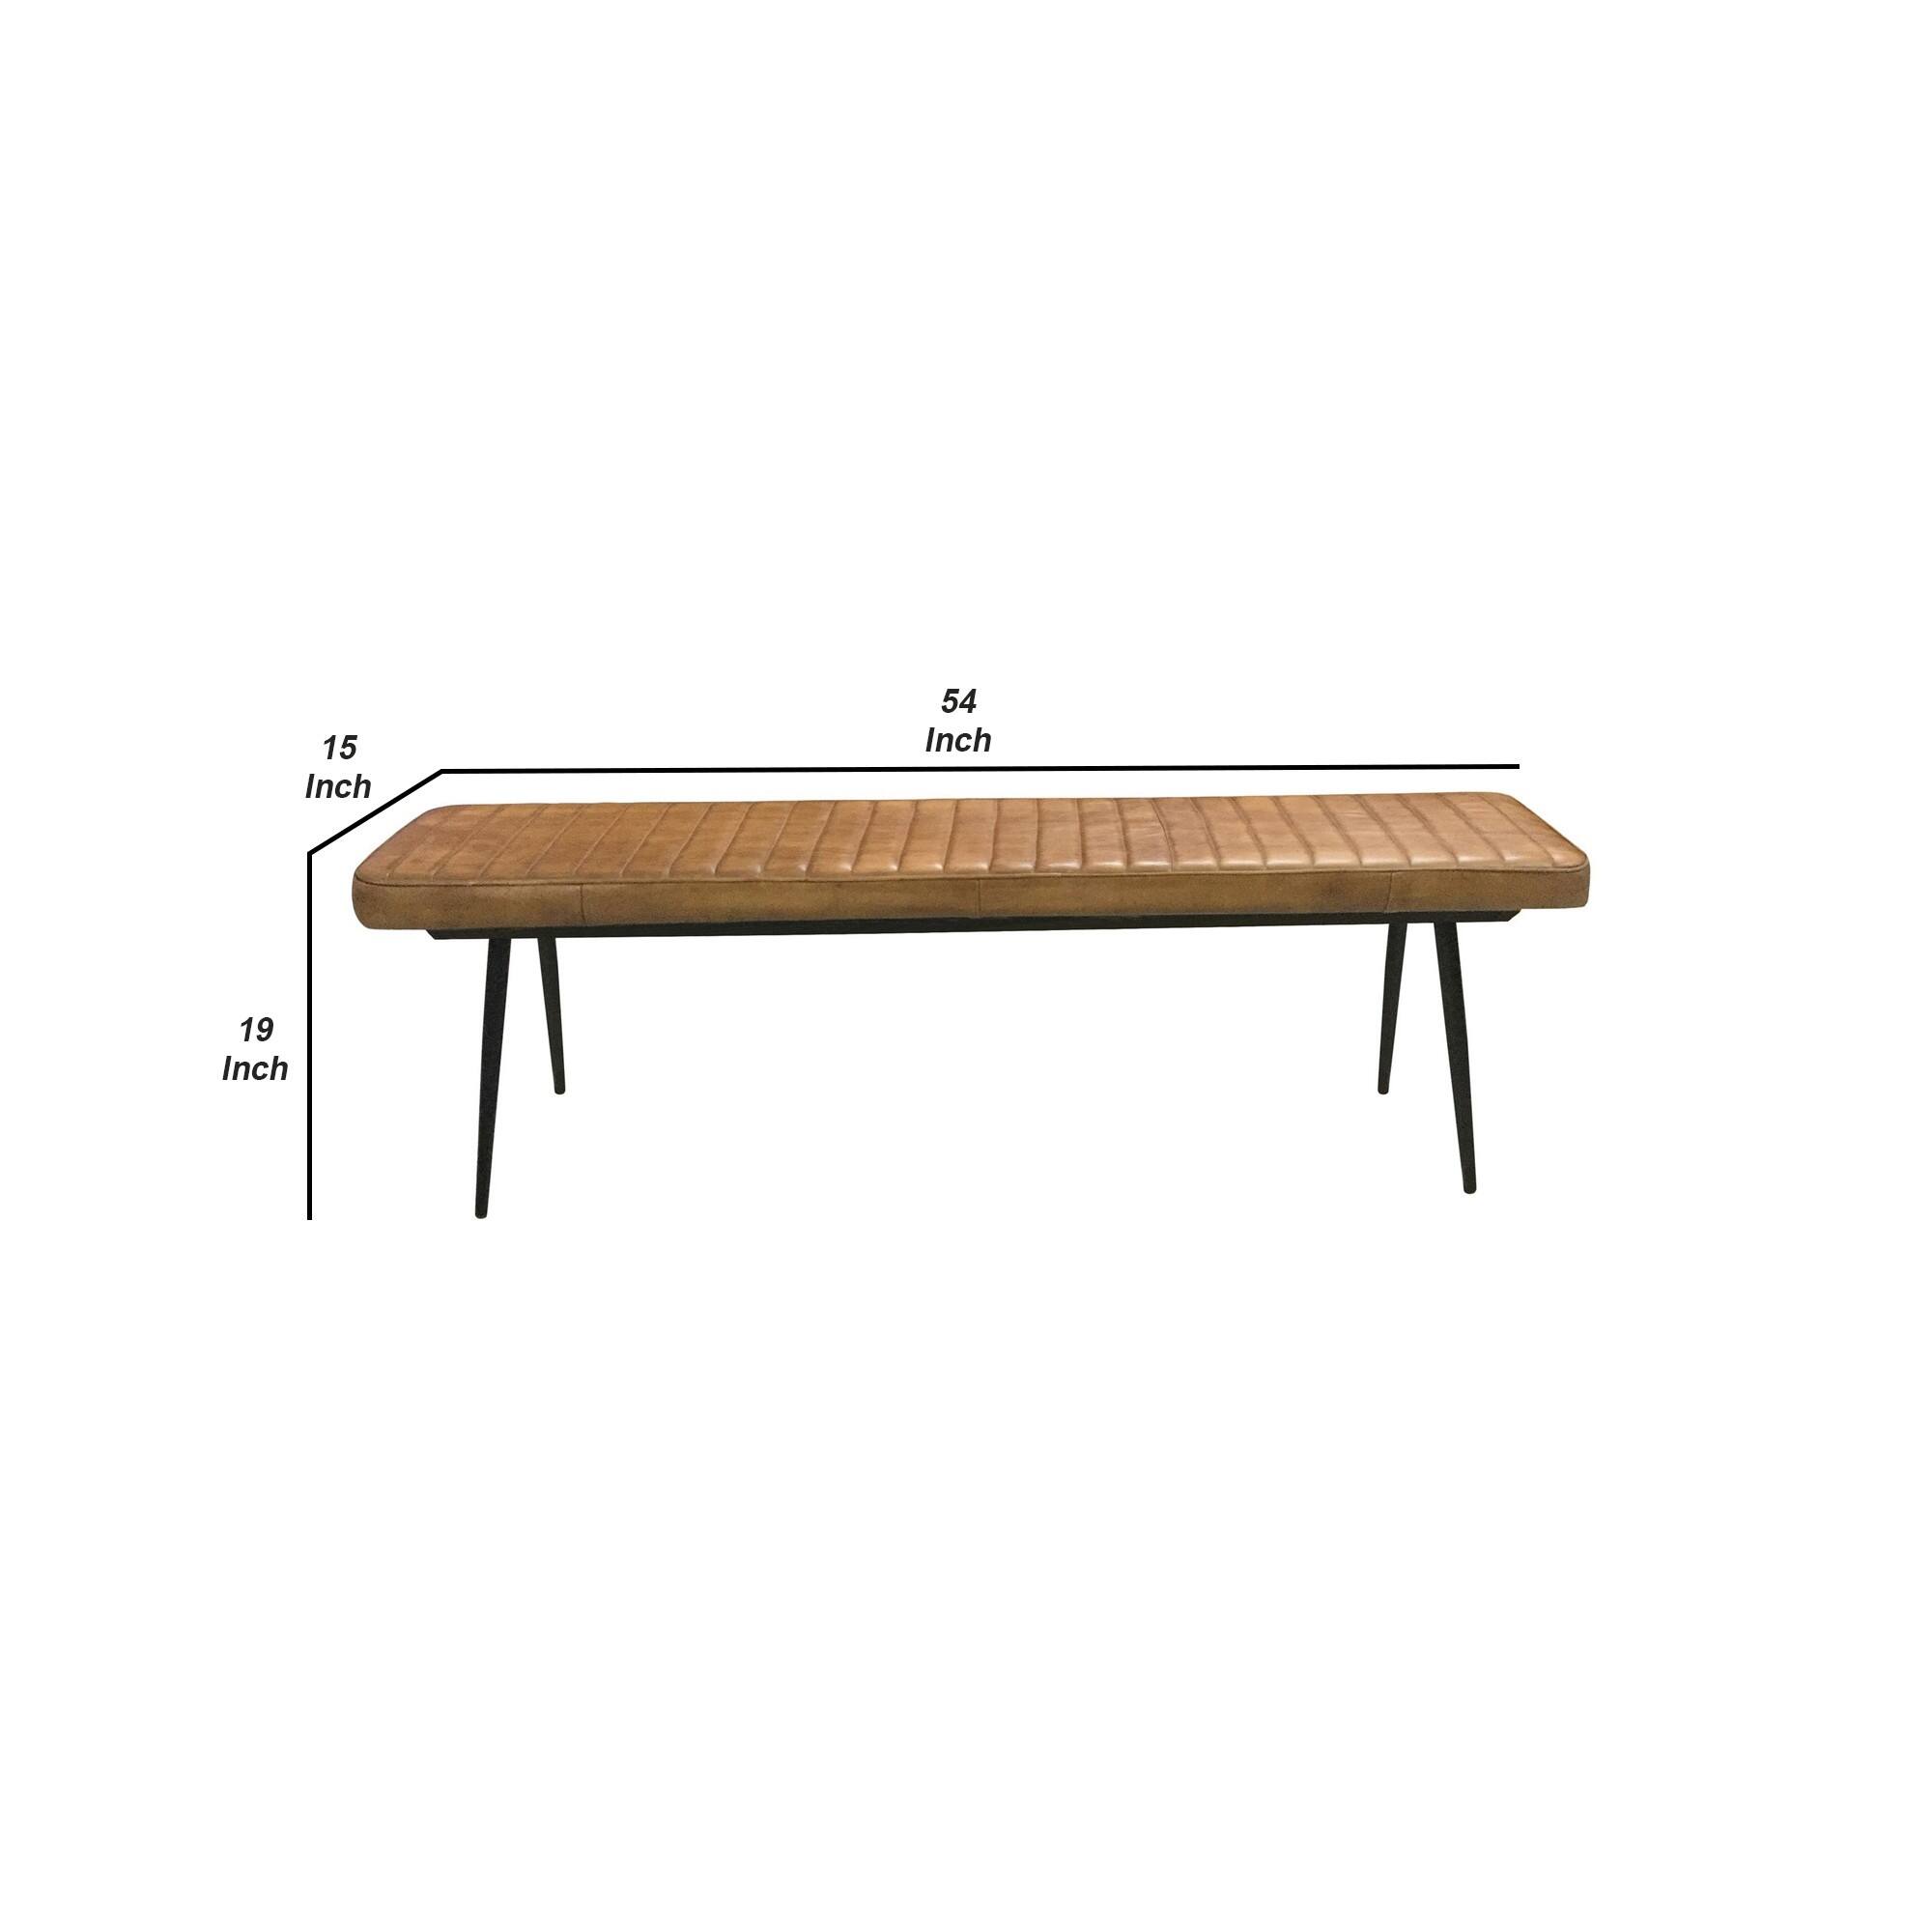 Bench with Tufted Leatherette Seat and Metal Legs, Brown